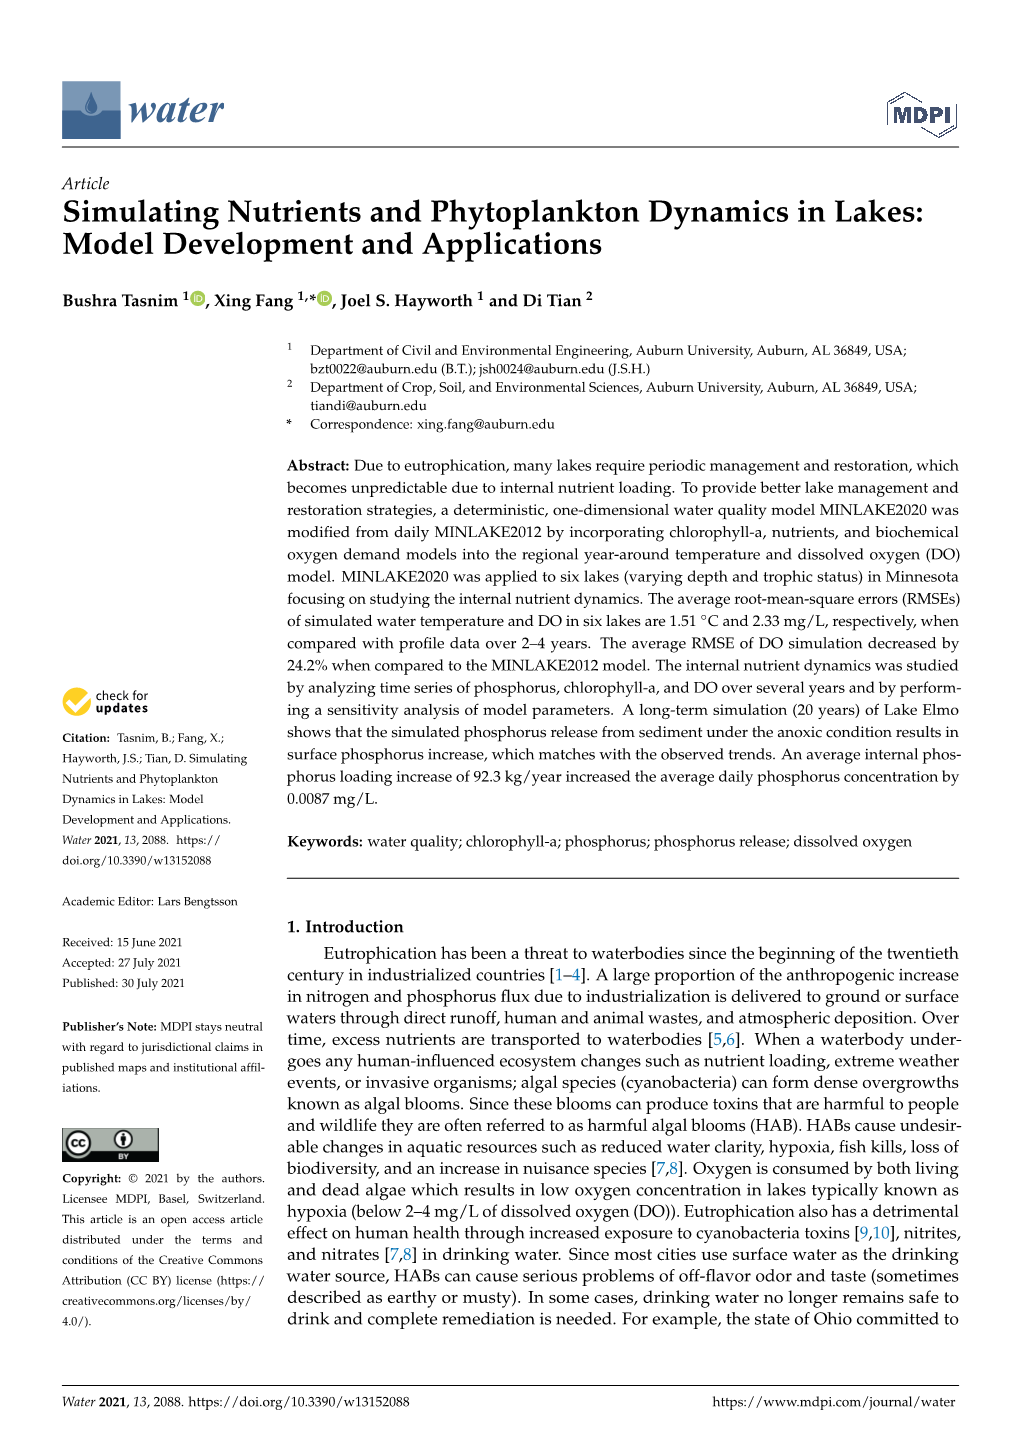 Simulating Nutrients and Phytoplankton Dynamics in Lakes: Model Development and Applications